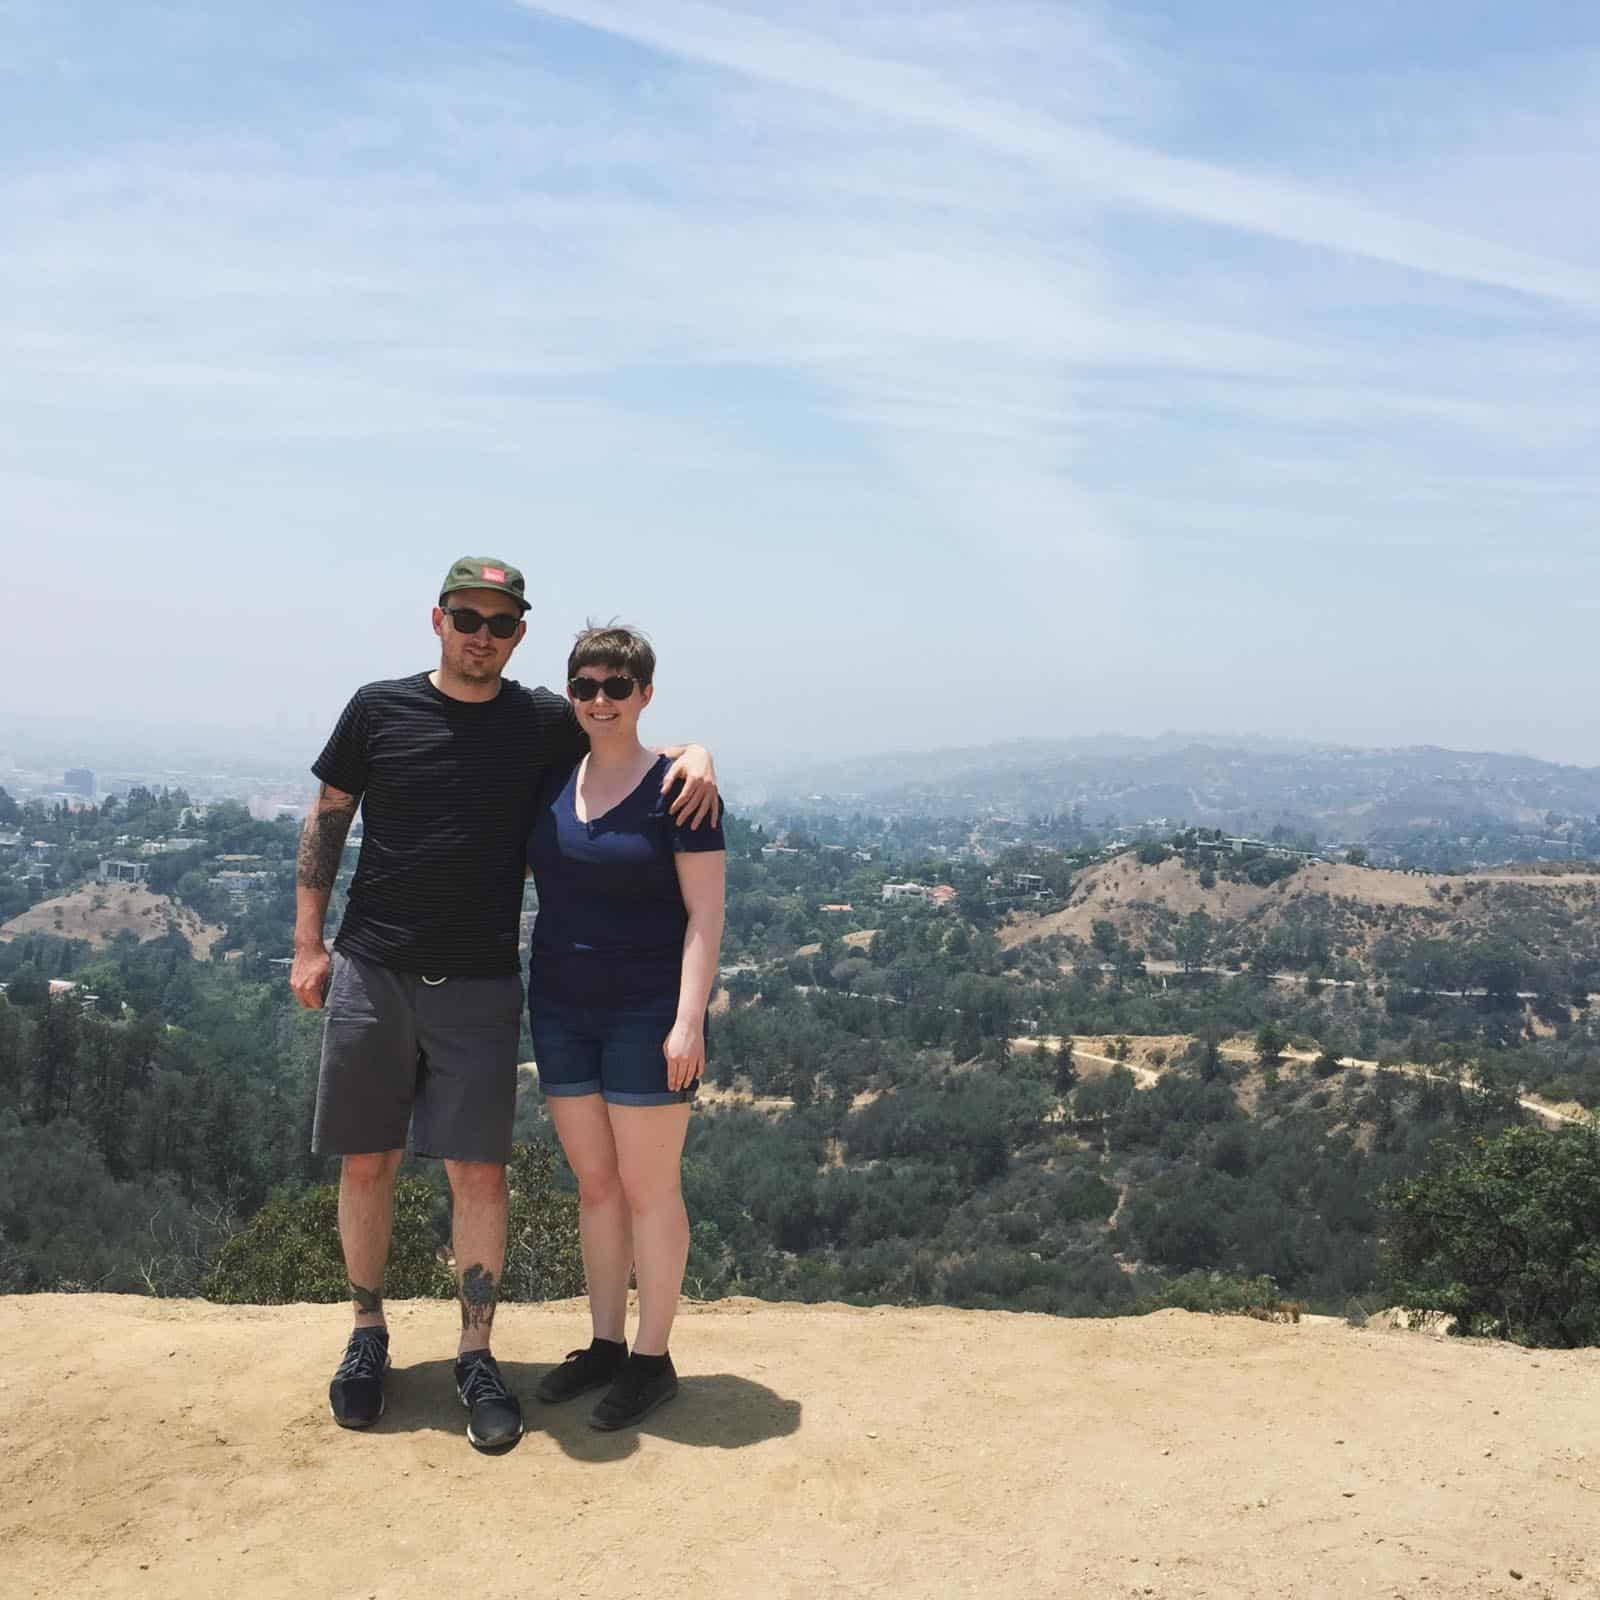 melissa and julian standing in front of california hills